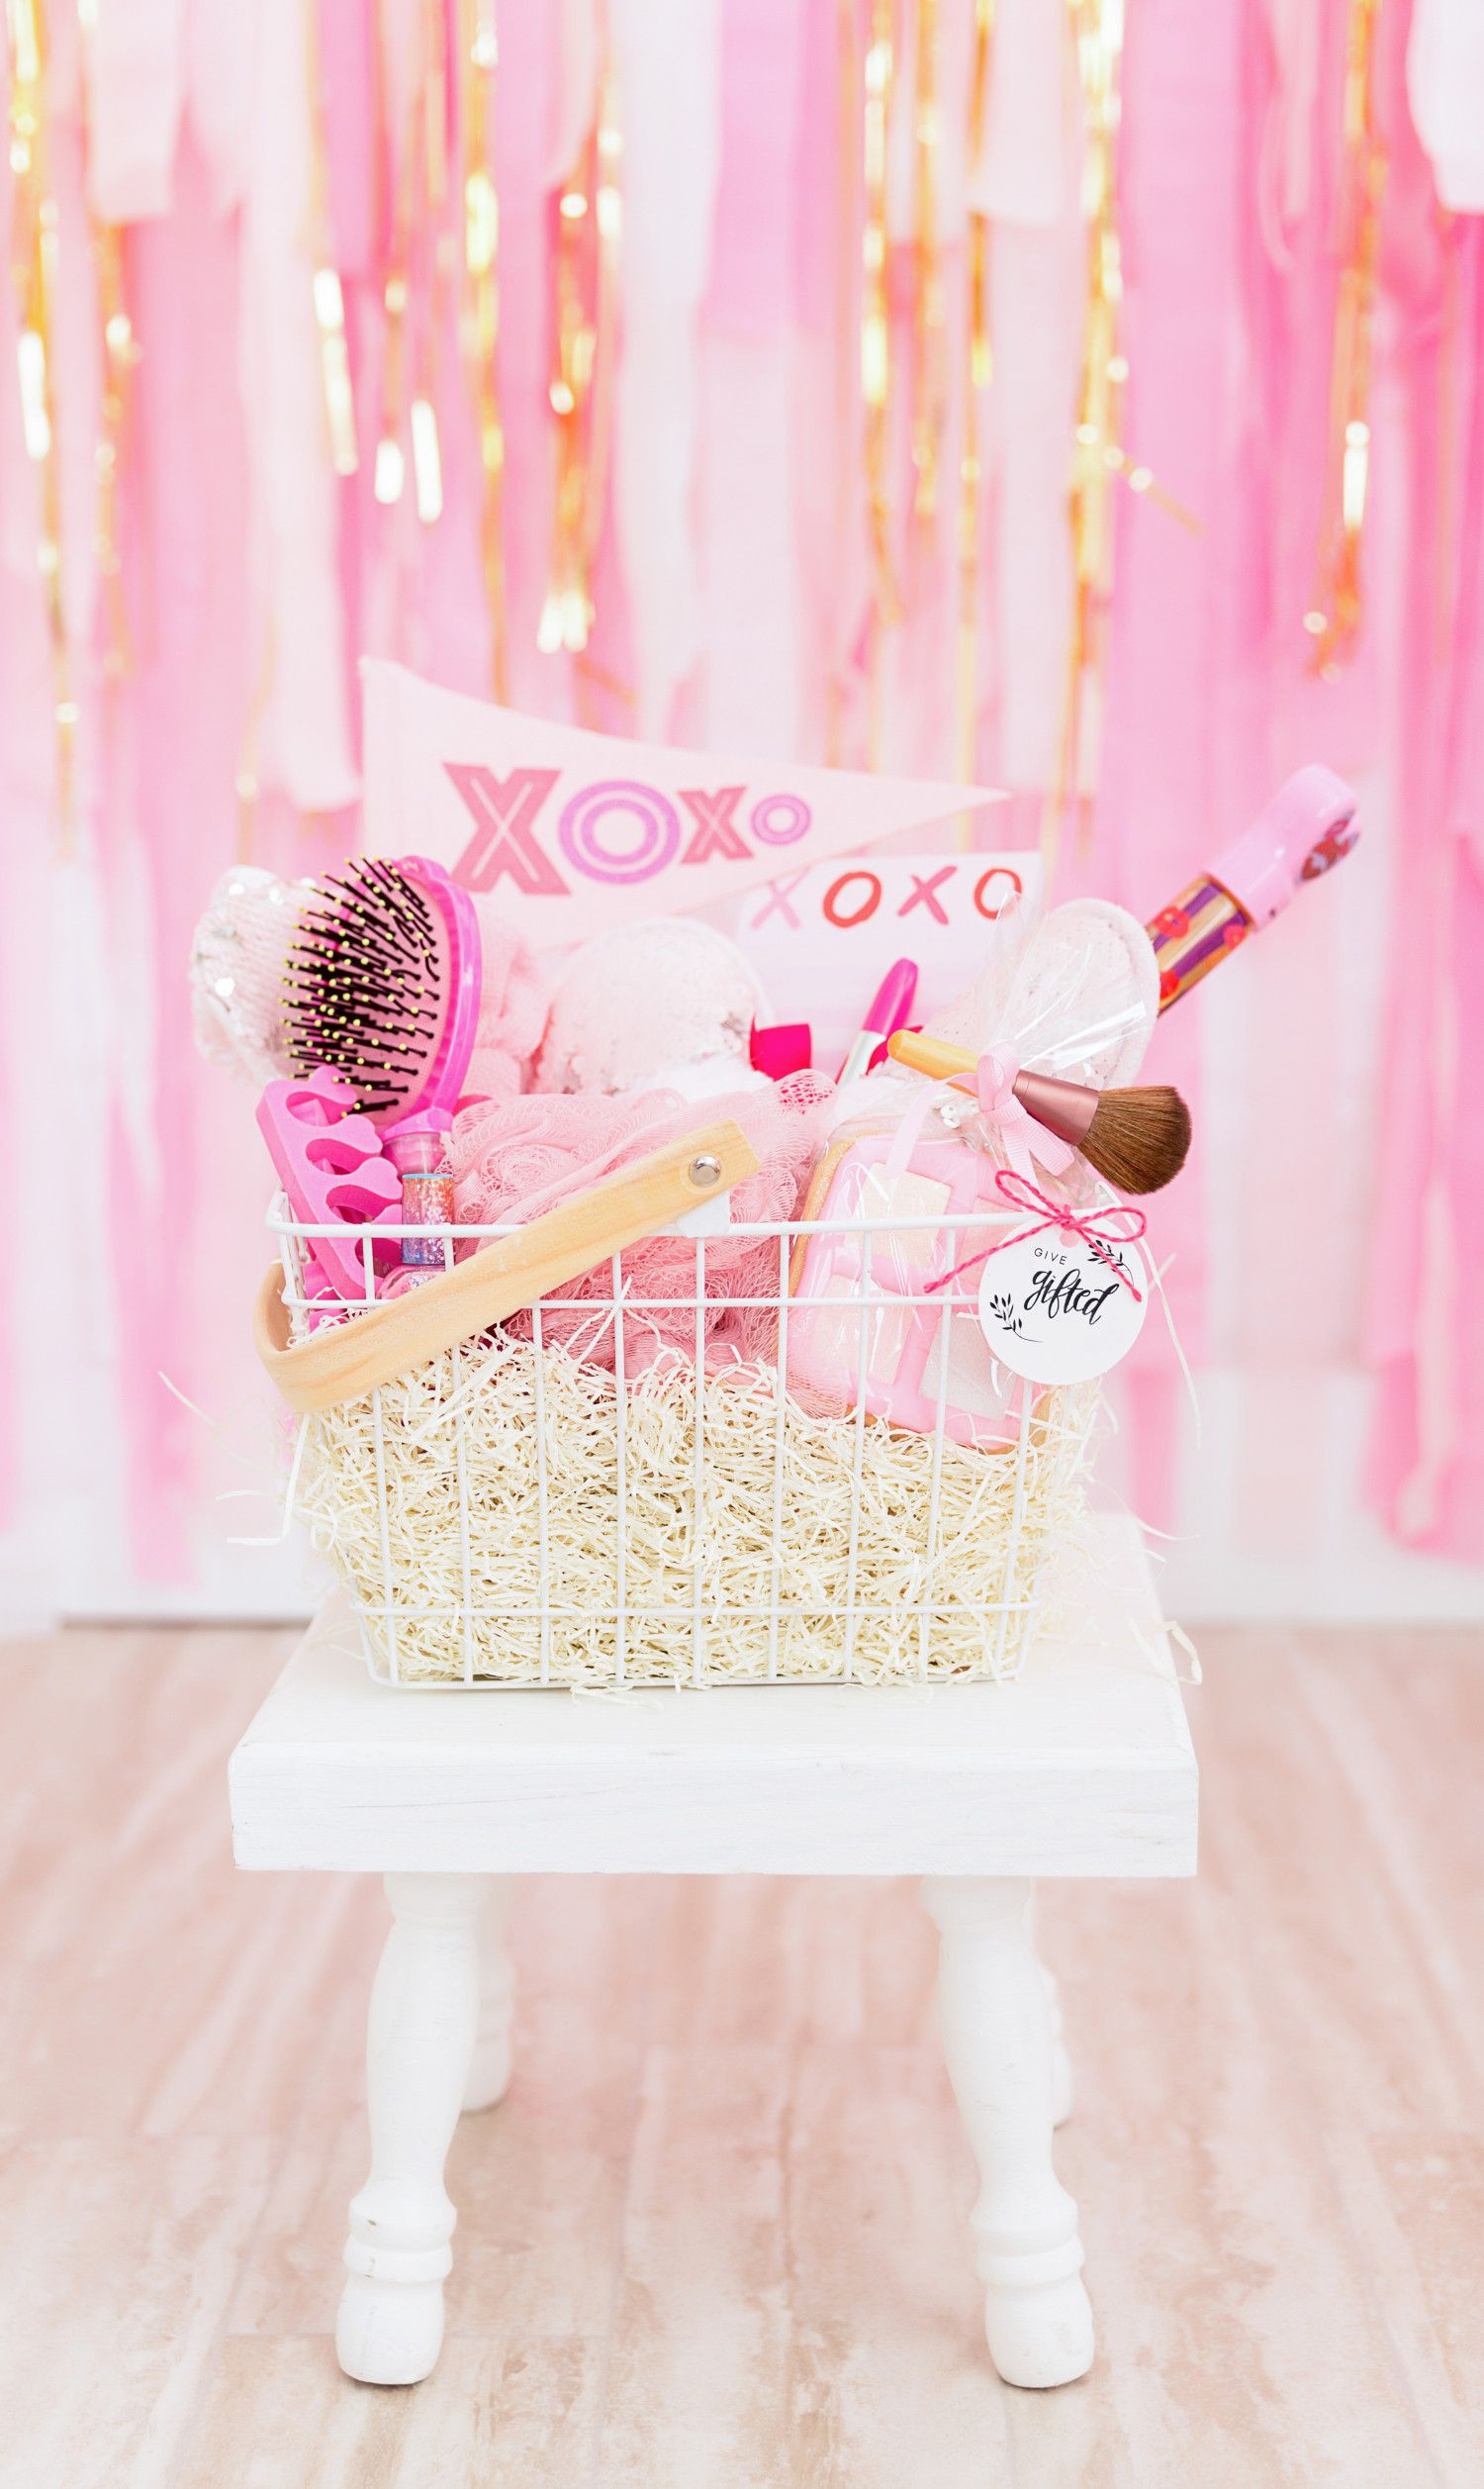 Girly Gift Basket Ideas
 Valentine’s Day Cards Girly Gift Ideas